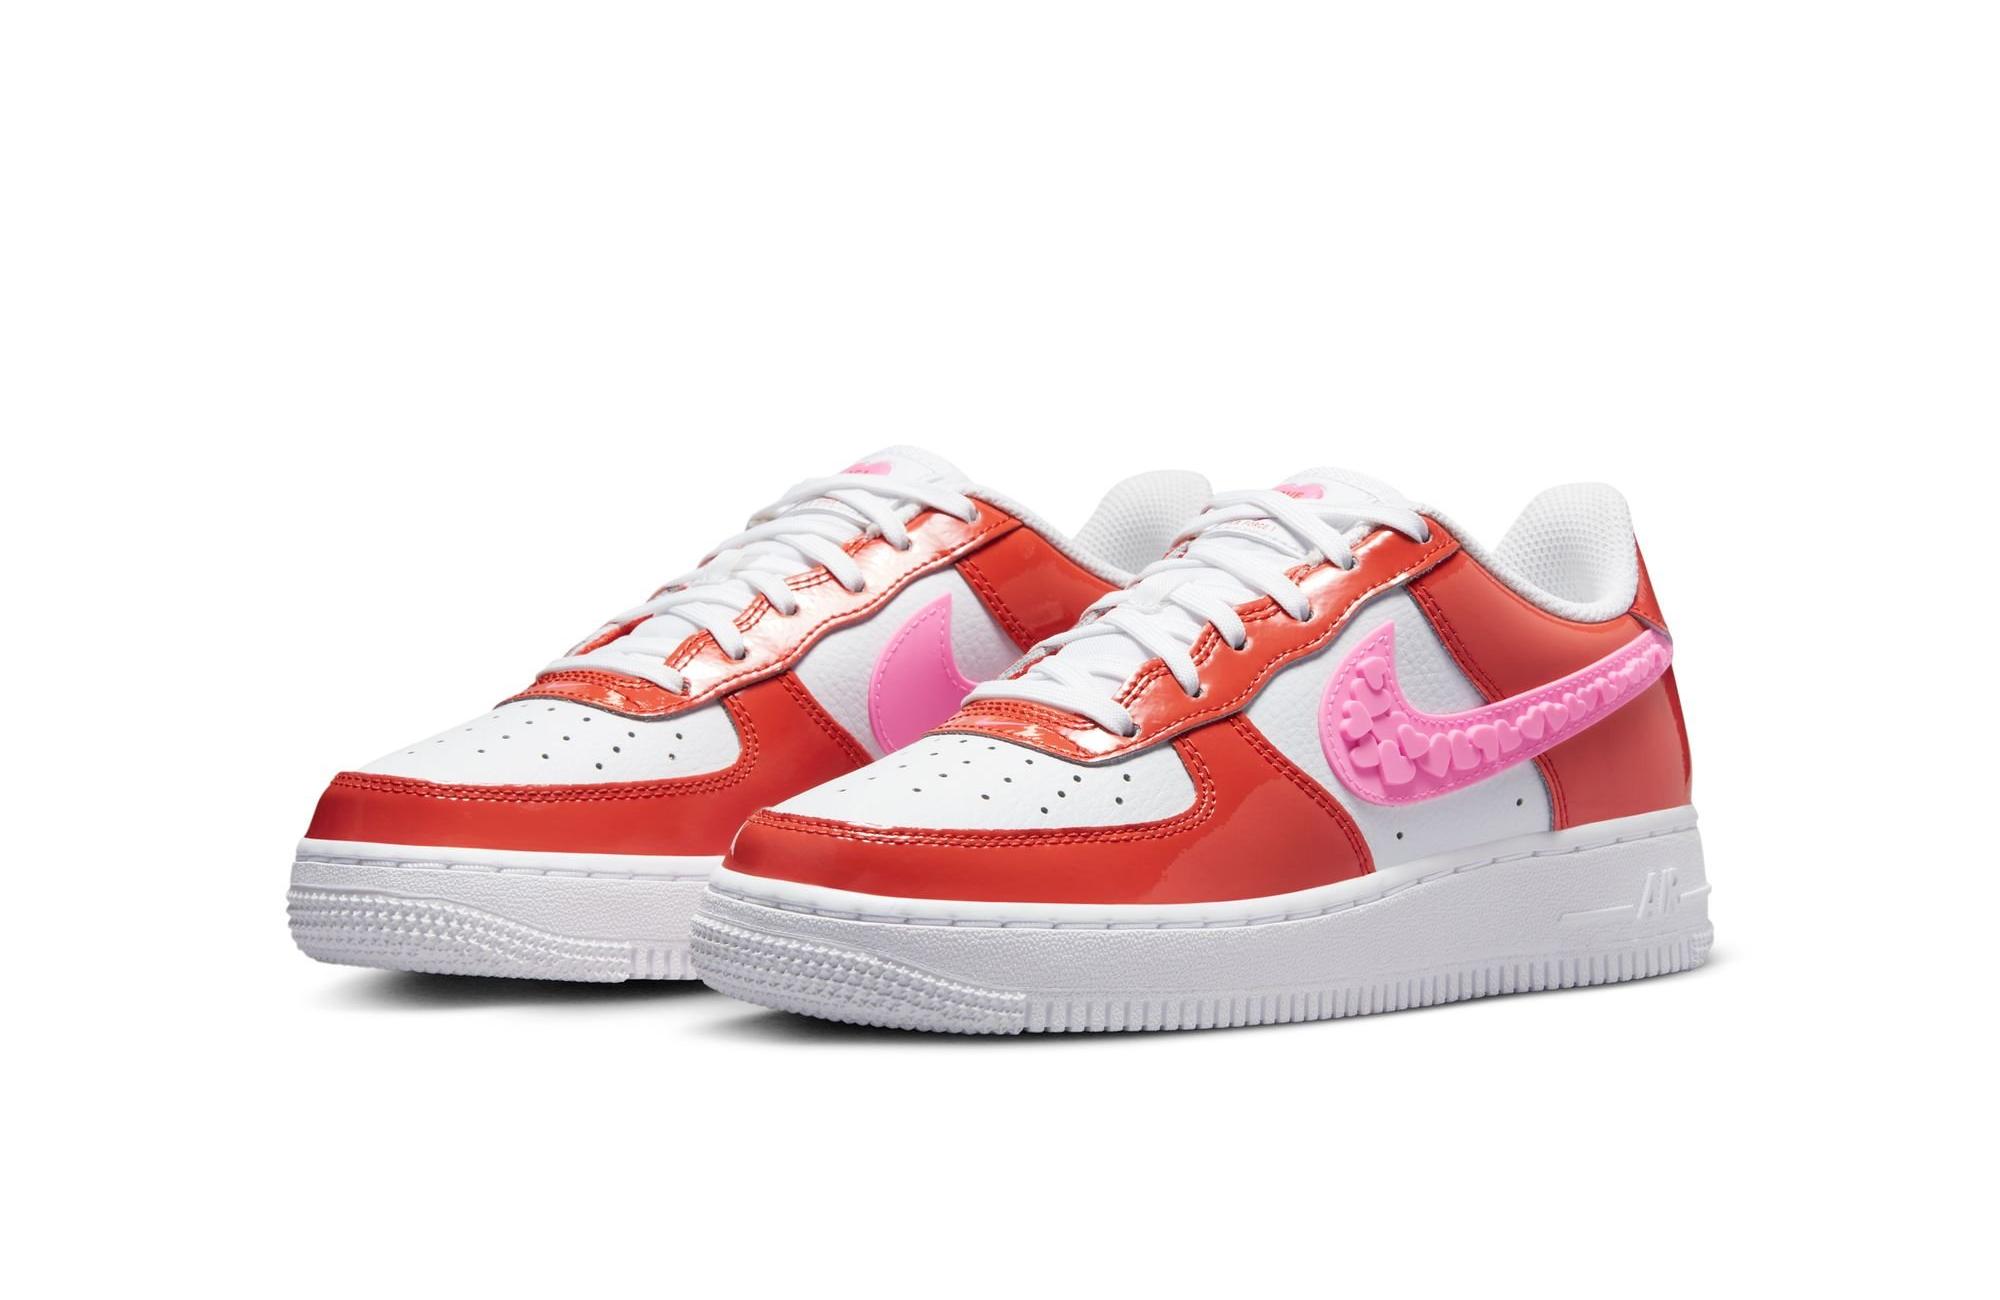 Nike Air Force 1 LV8 Team Red Black Grade School Lifestyle Shoes